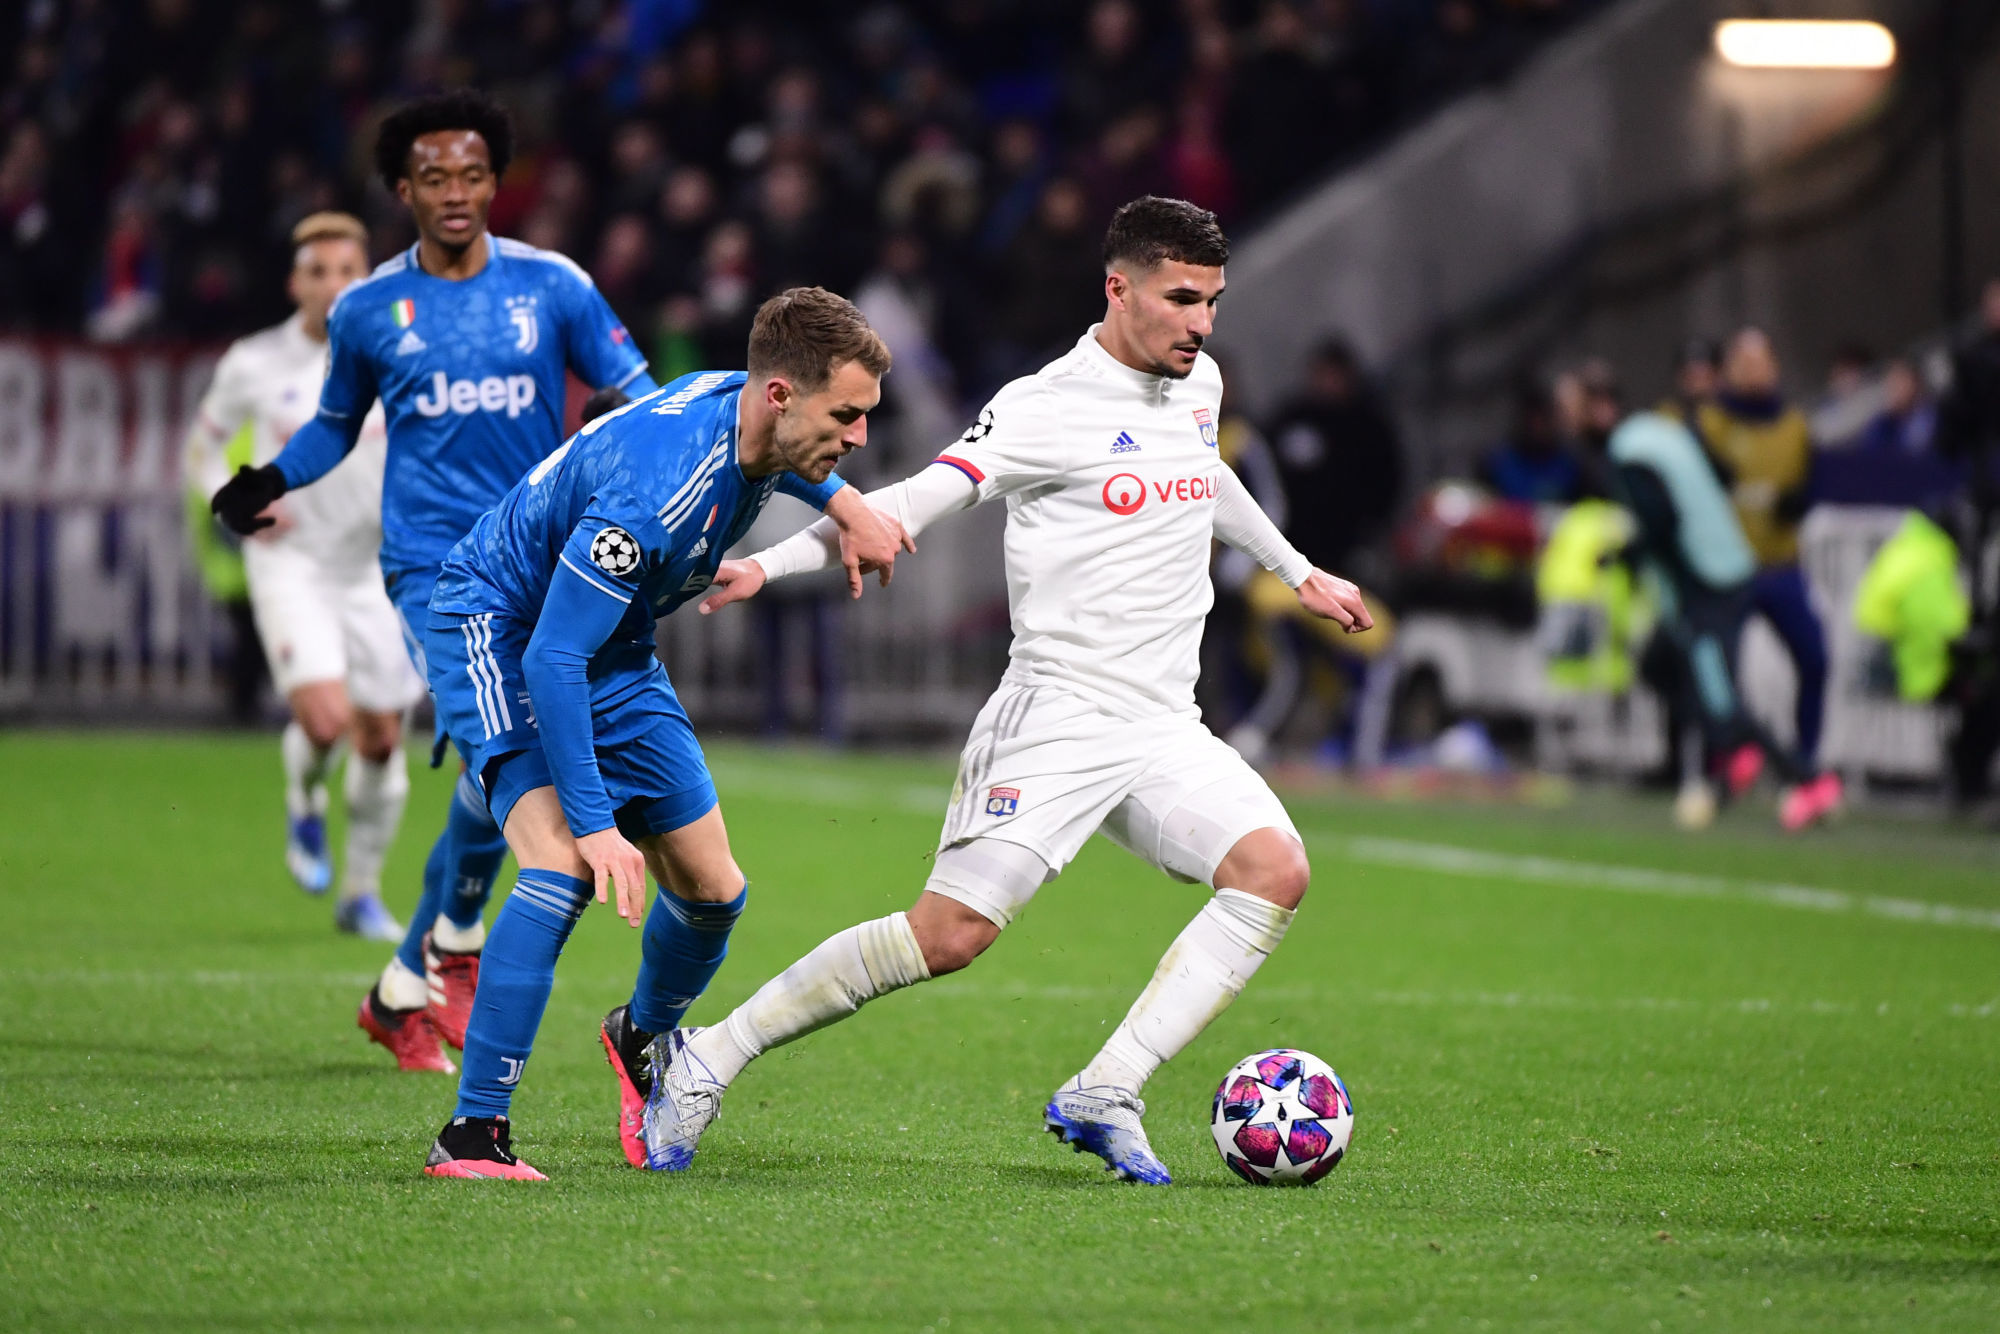 Houssem AOUAR of Lyon during the UEFA Champions League round of 16 first leg match between Lyon and Juventus at Groupama Stadium on February 26, 2020 in Lyon, France. (Photo by Dave Winter/Icon Sport) - Houssem AOUAR - Juan CUADRADO - Groupama Stadium - Lyon (France)